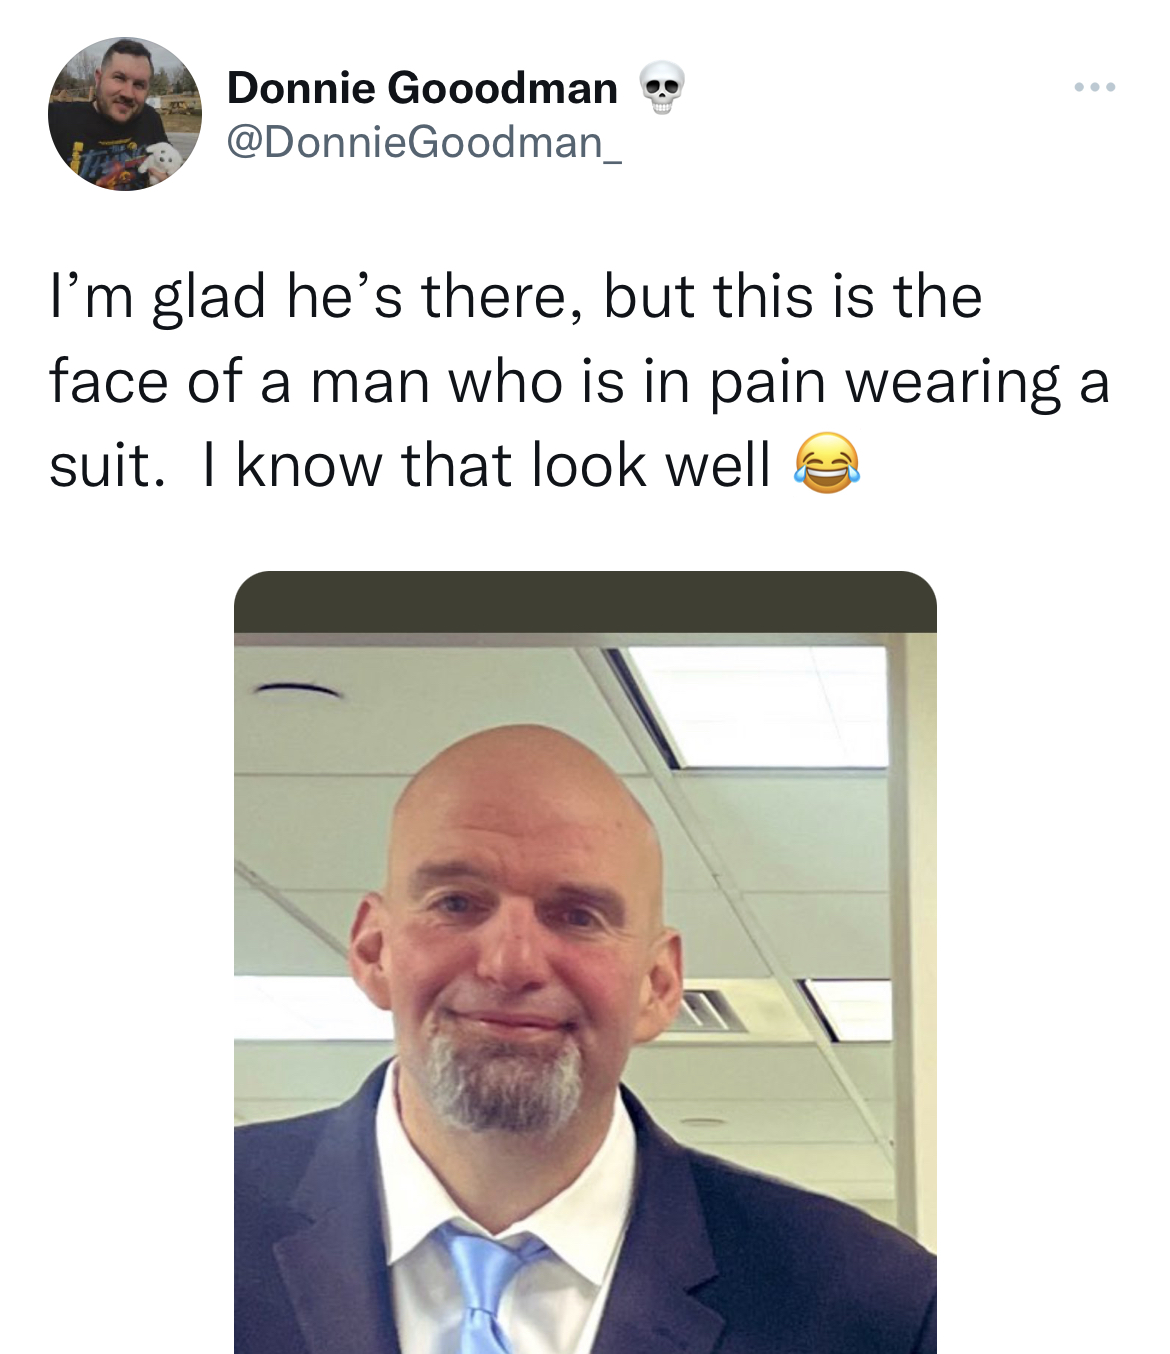 Tweets dunking on celebs - communication - Donnie Gooodman I'm glad he's there, but this is the face of a man who is in pain wearing a suit. I know that look well